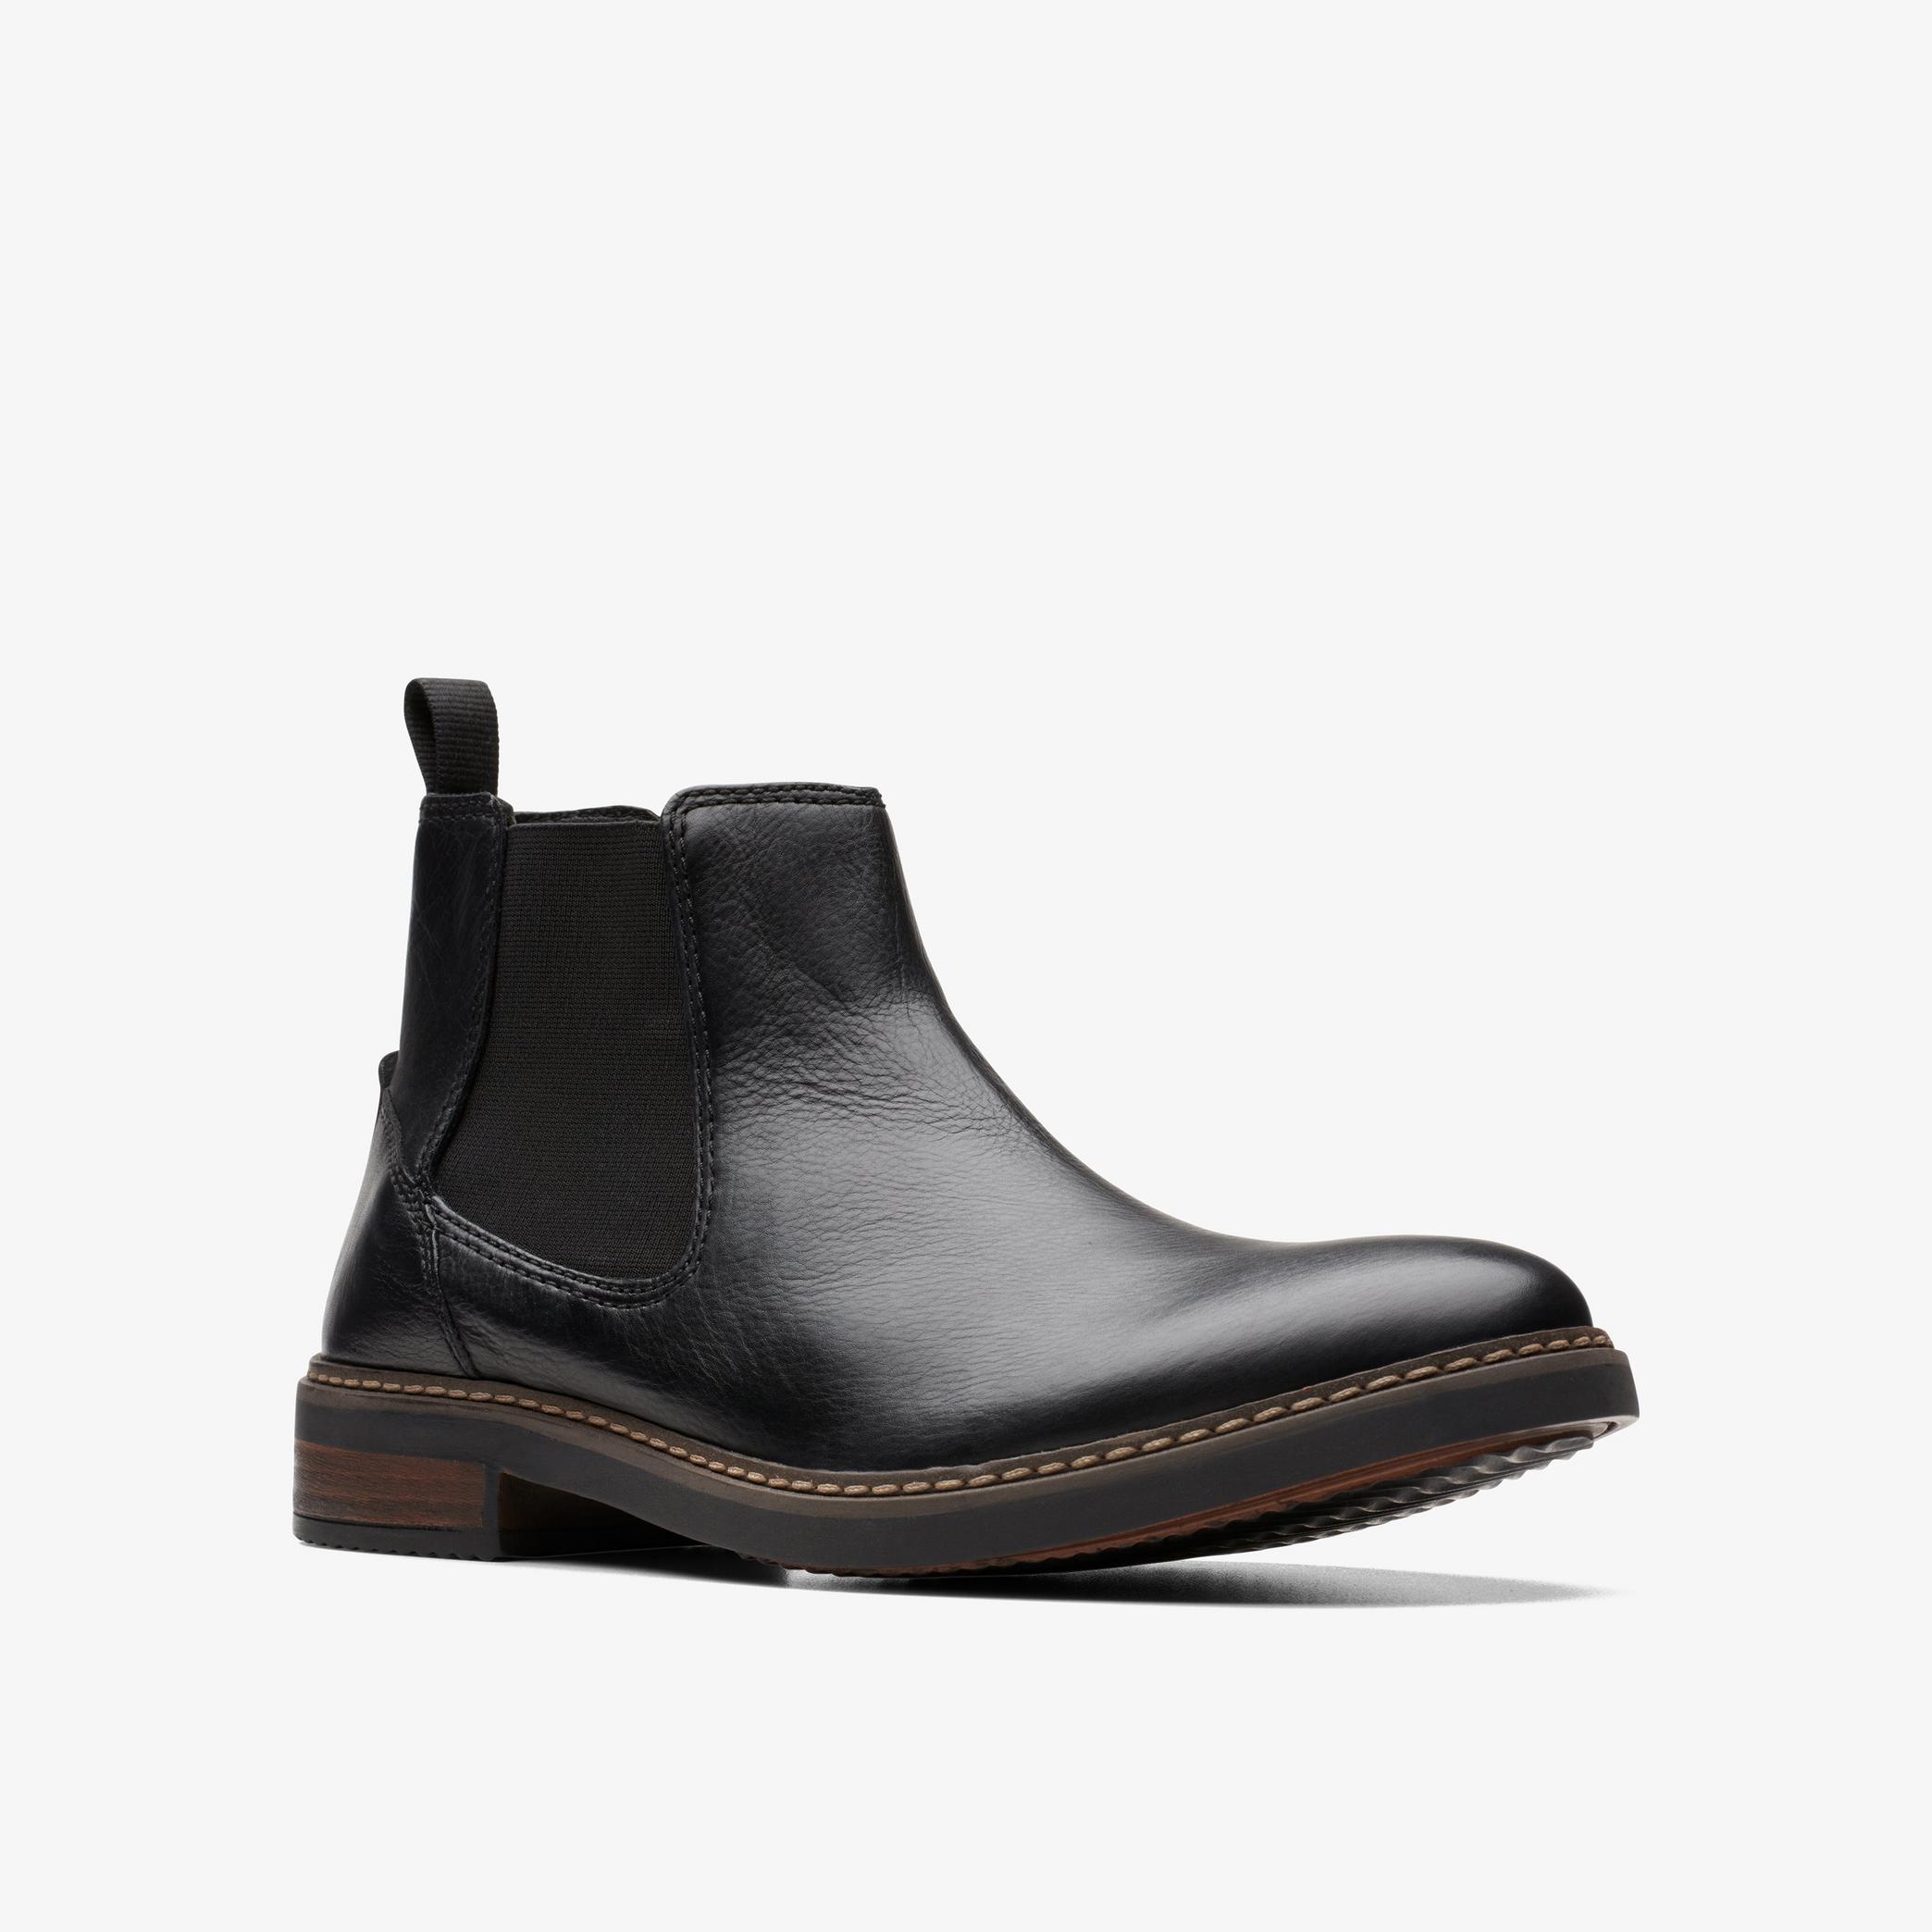 Blackford Top Black Leather Chelsea Boots, view 3 of 6